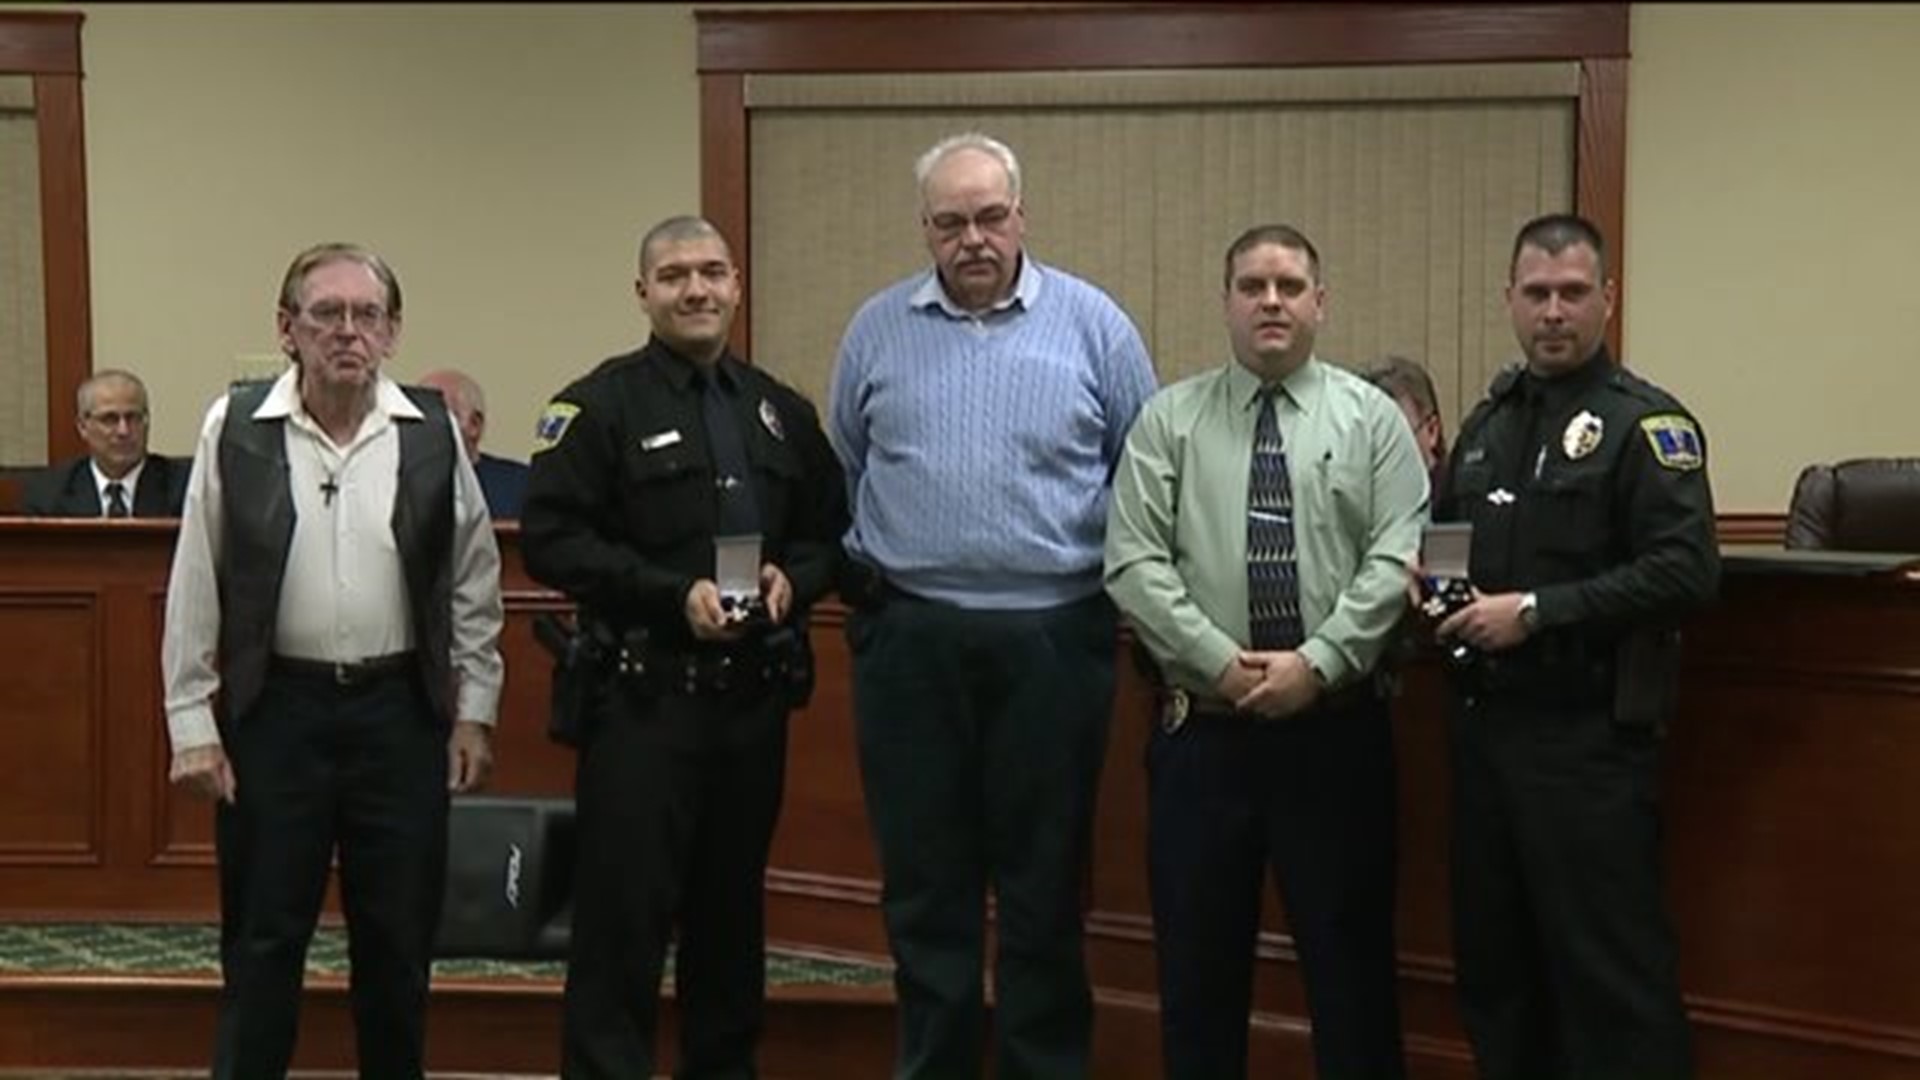 Police Officers Honored for Life-saving Act